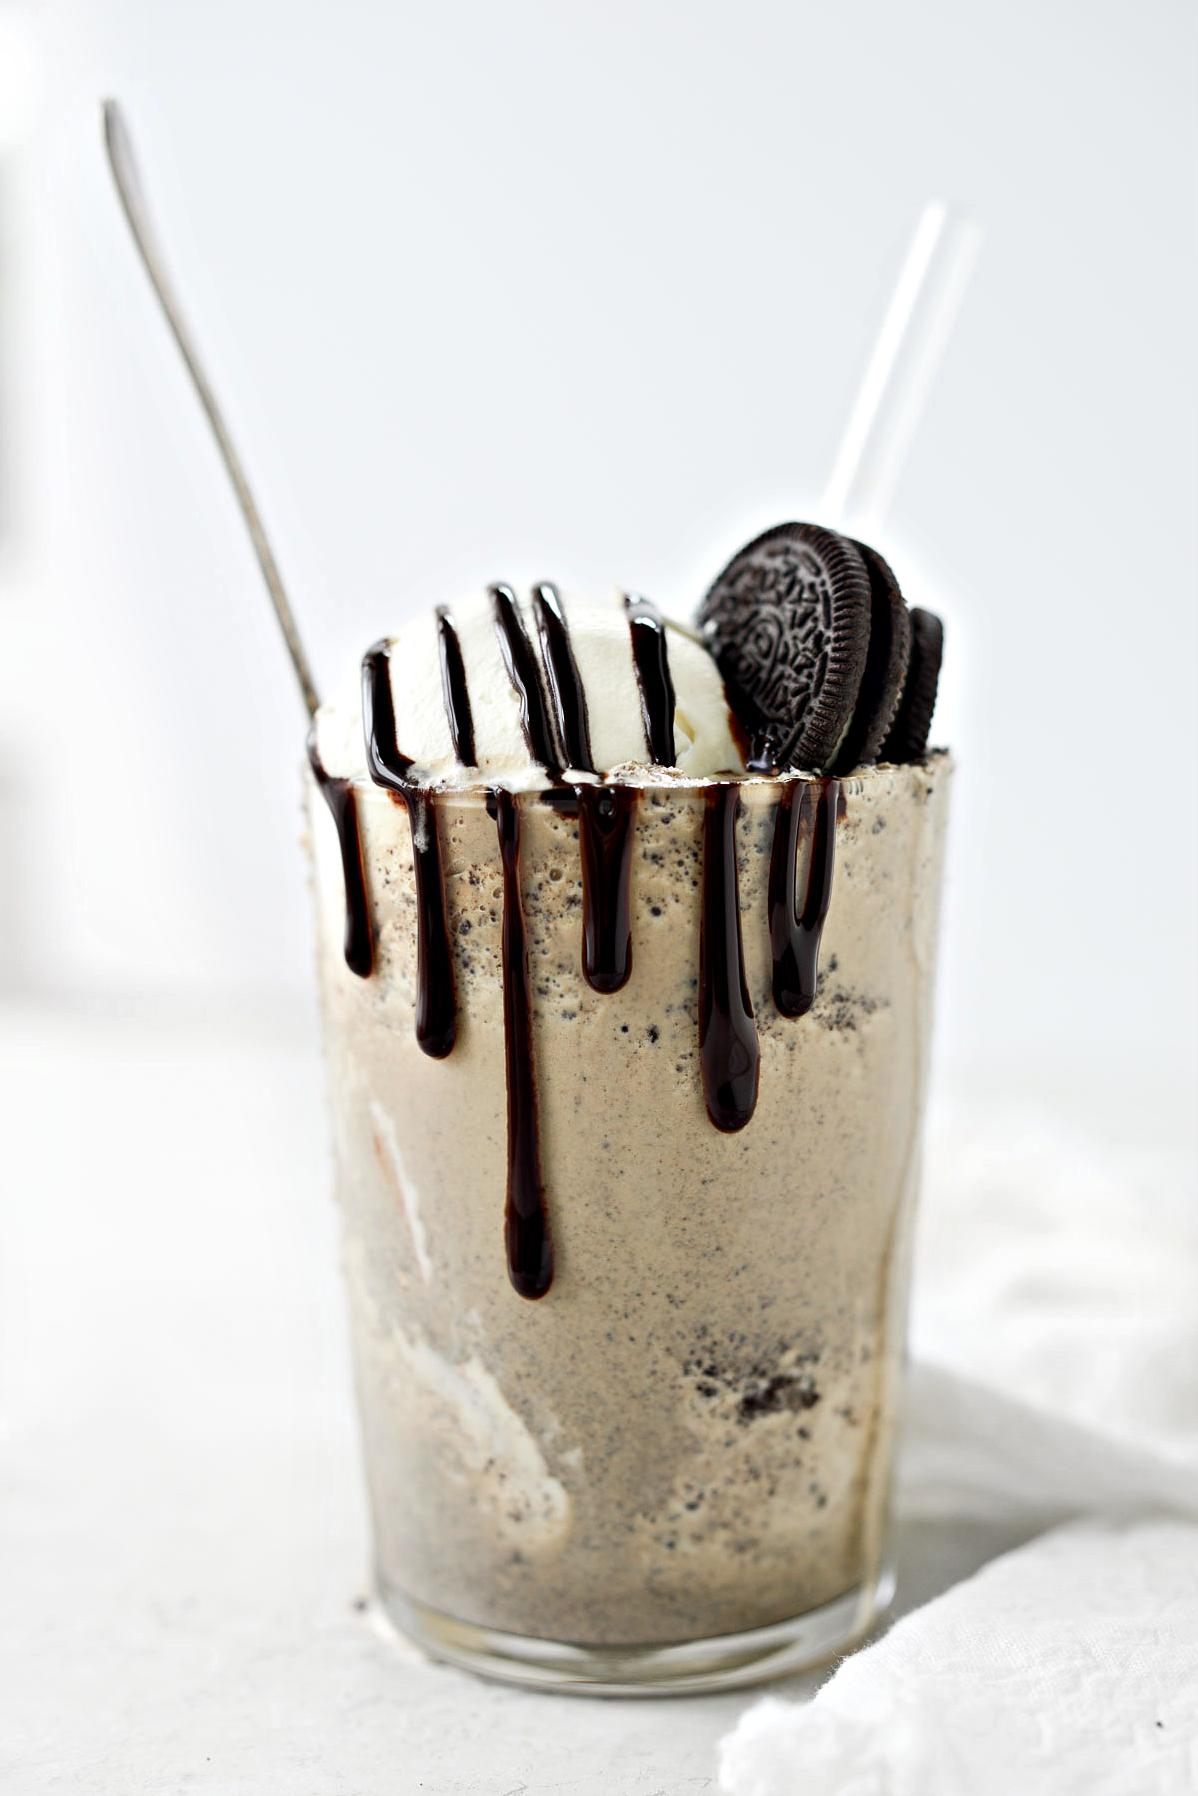  Are you an Oreo lover? Espresso addict? Combine the two in this delicious shake!